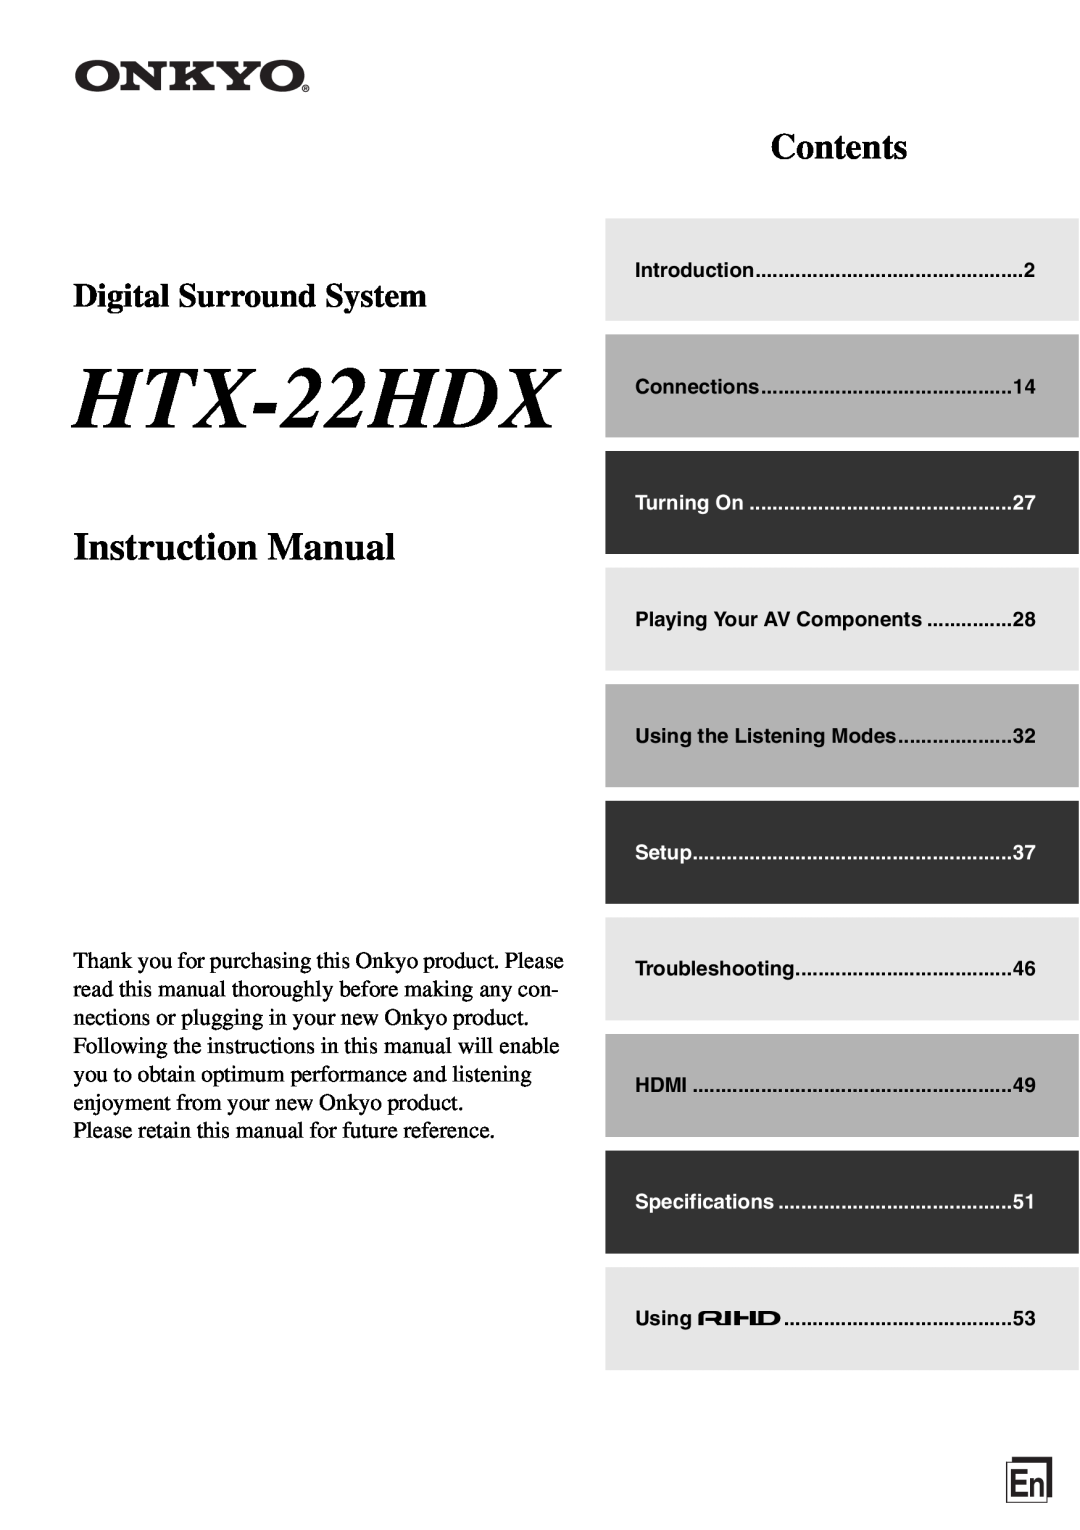 Onkyo HTX-22HDXPAW instruction manual Contents, Digital Surround System, Turning On, Setup, Specifications, Introduction 